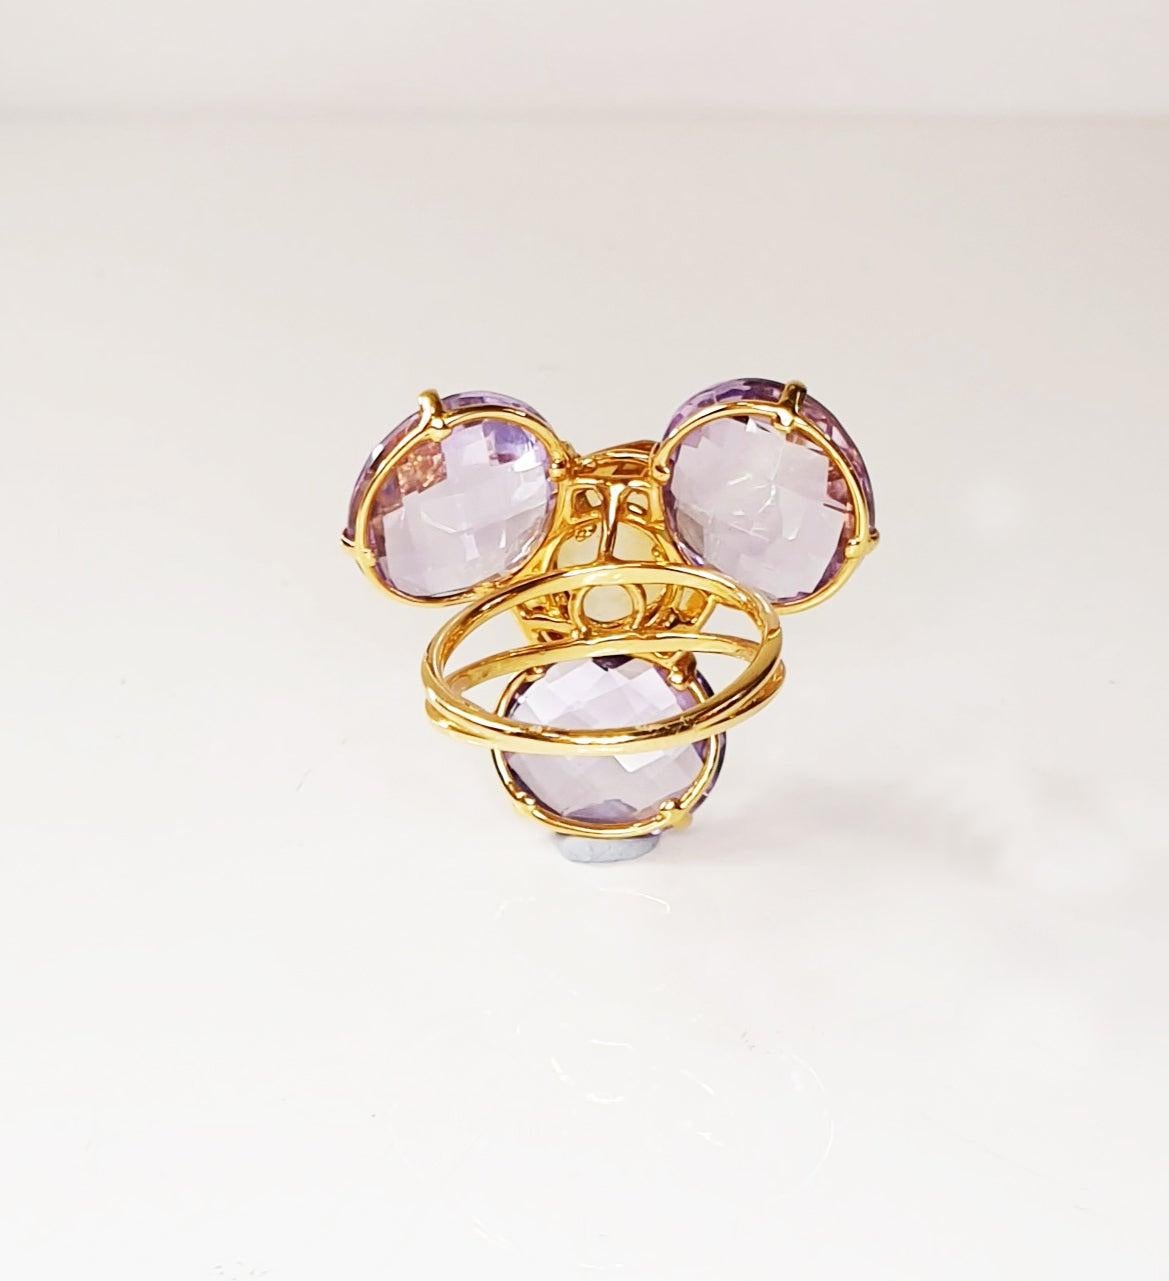 Multiphaceted Flower Ring with Central Citrine and Three Amethysts 7